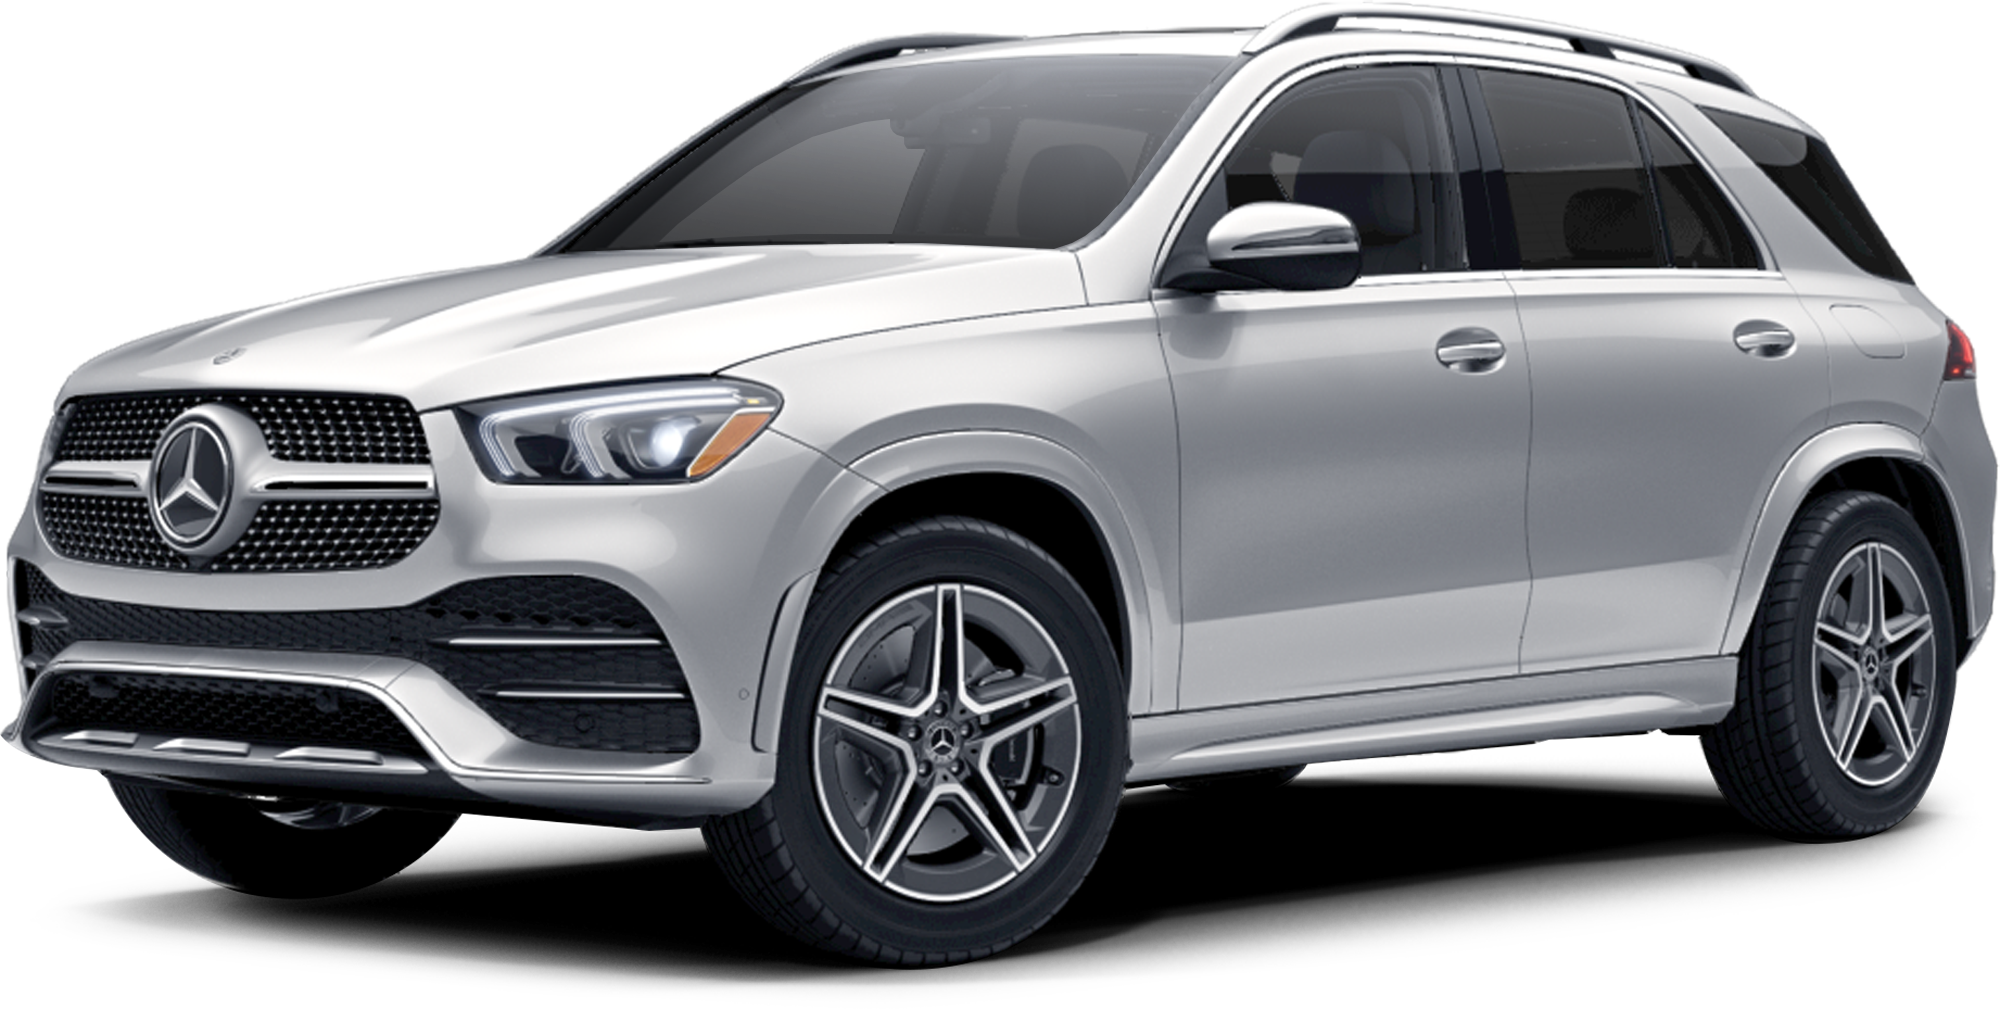 2021 Mercedes-Benz GLE 580 Incentives, Specials & Offers in Tulsa OK